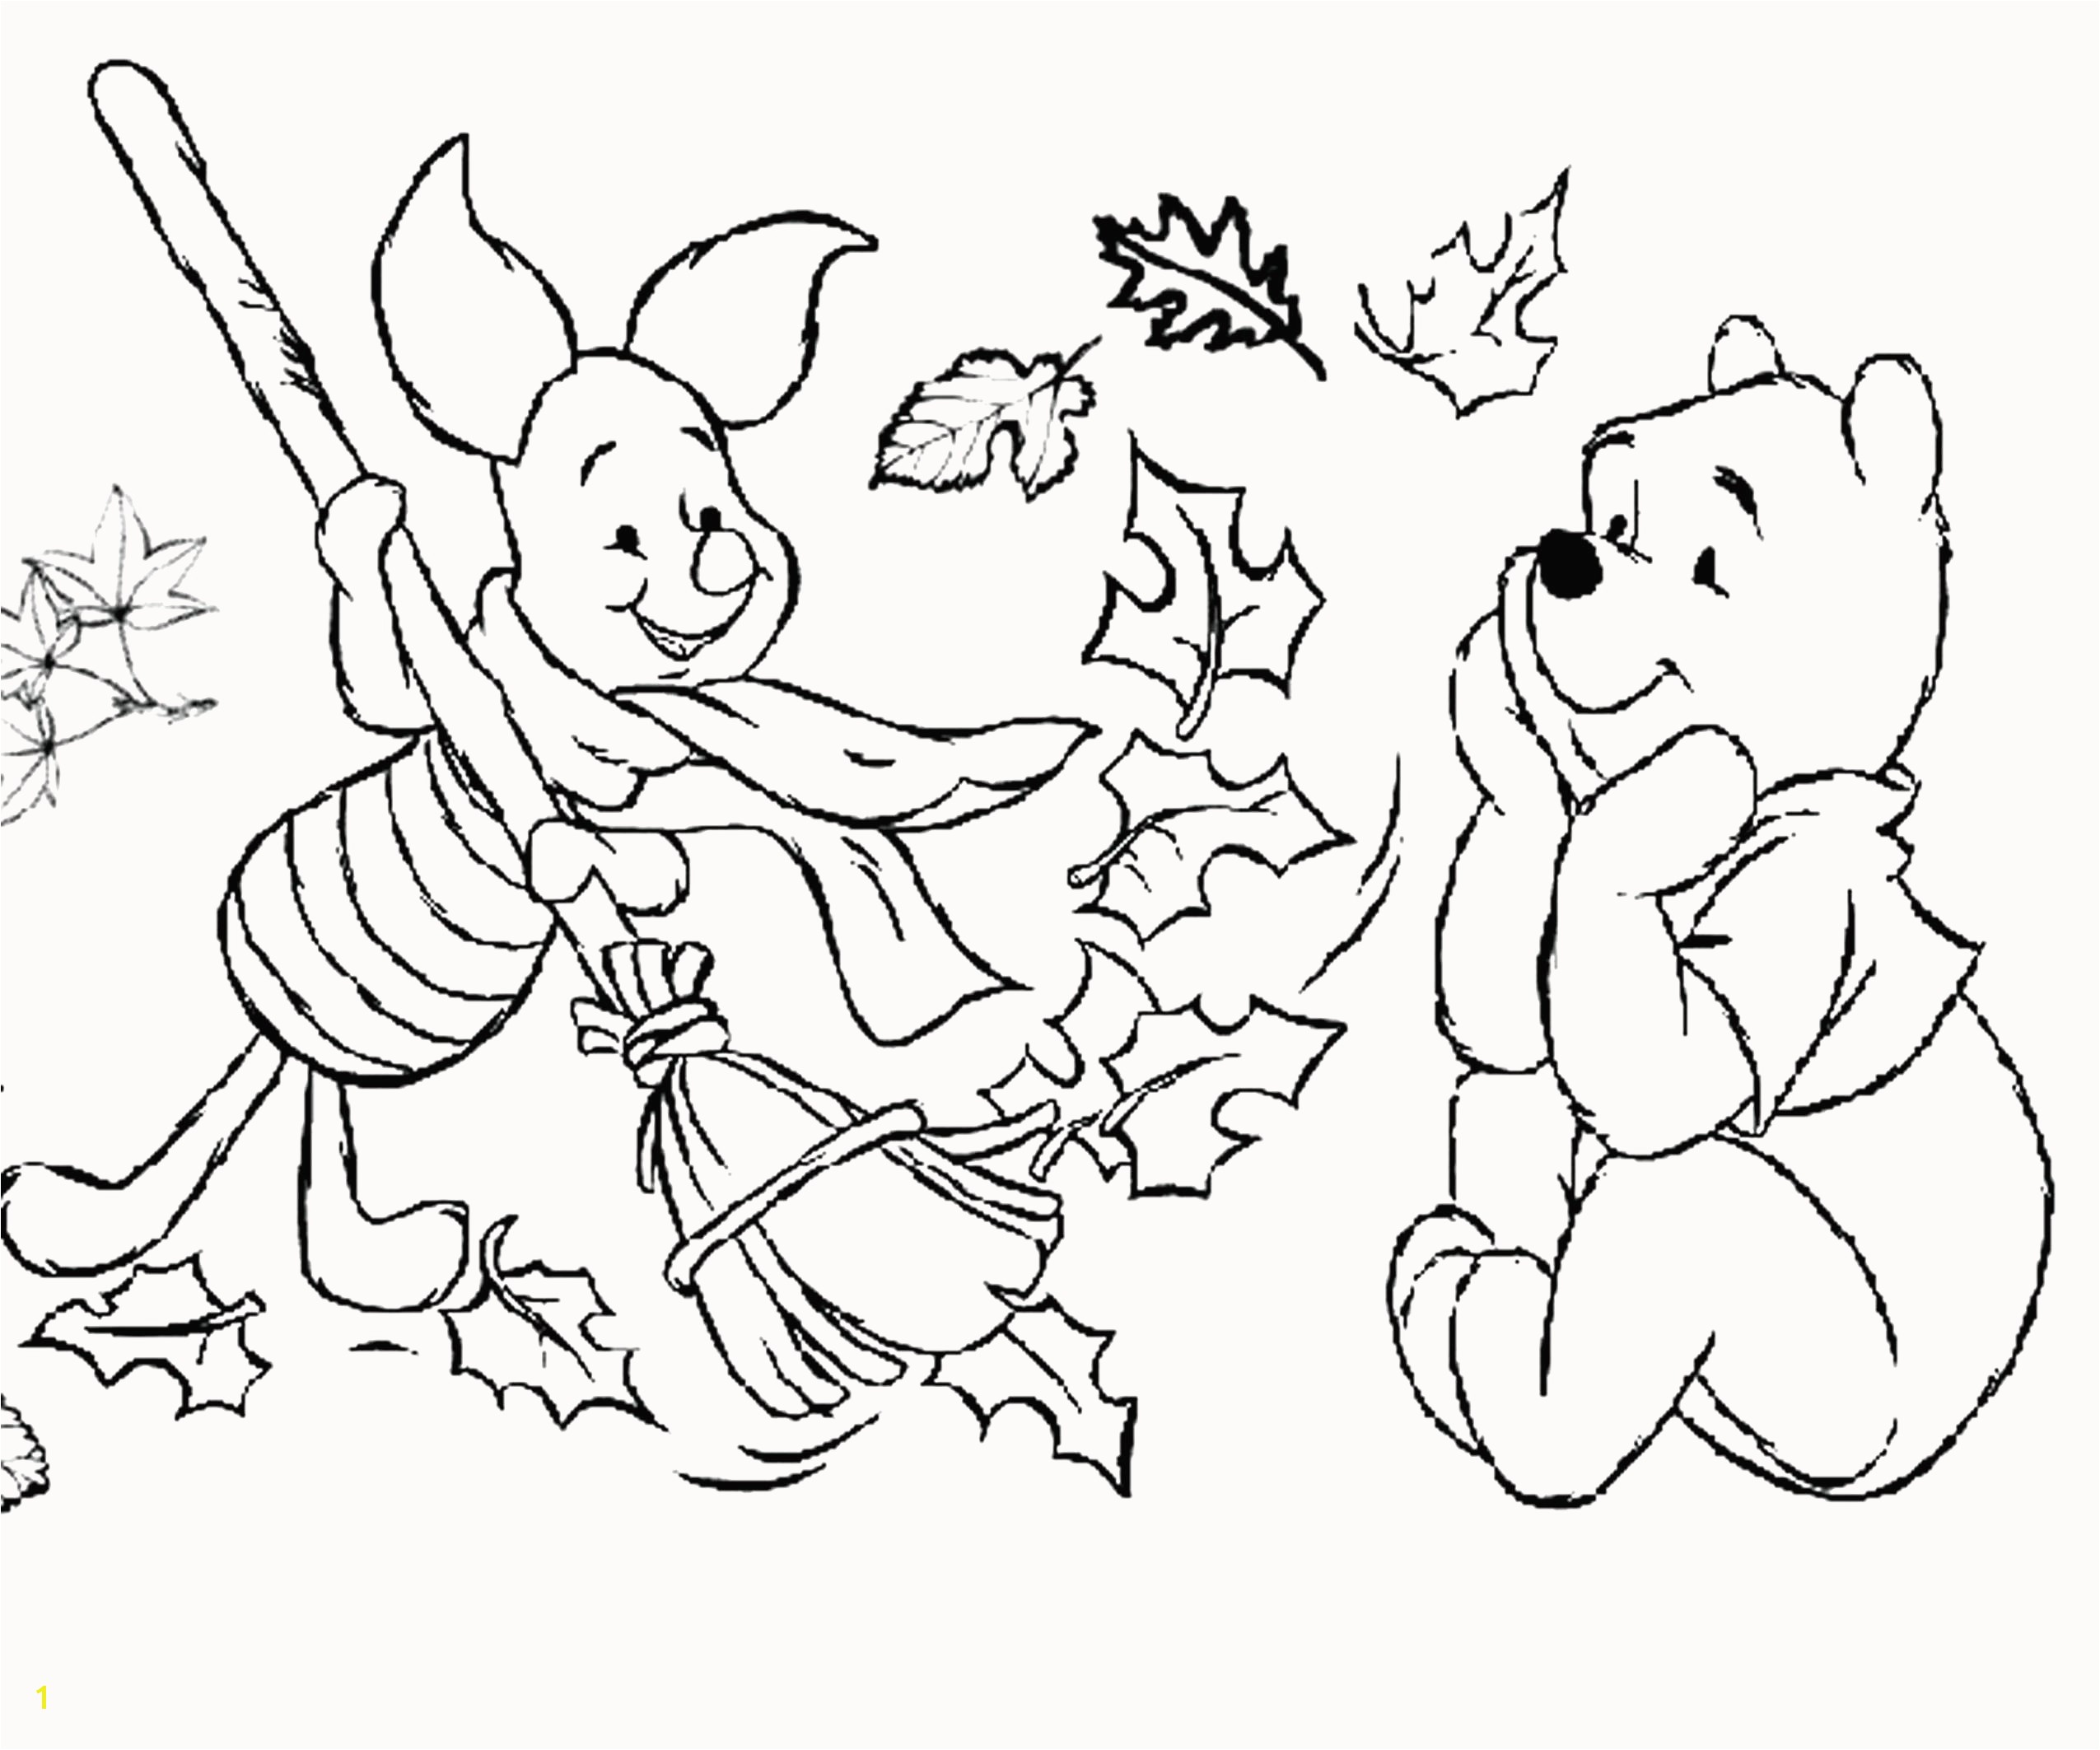 Doubting Thomas Coloring Pages